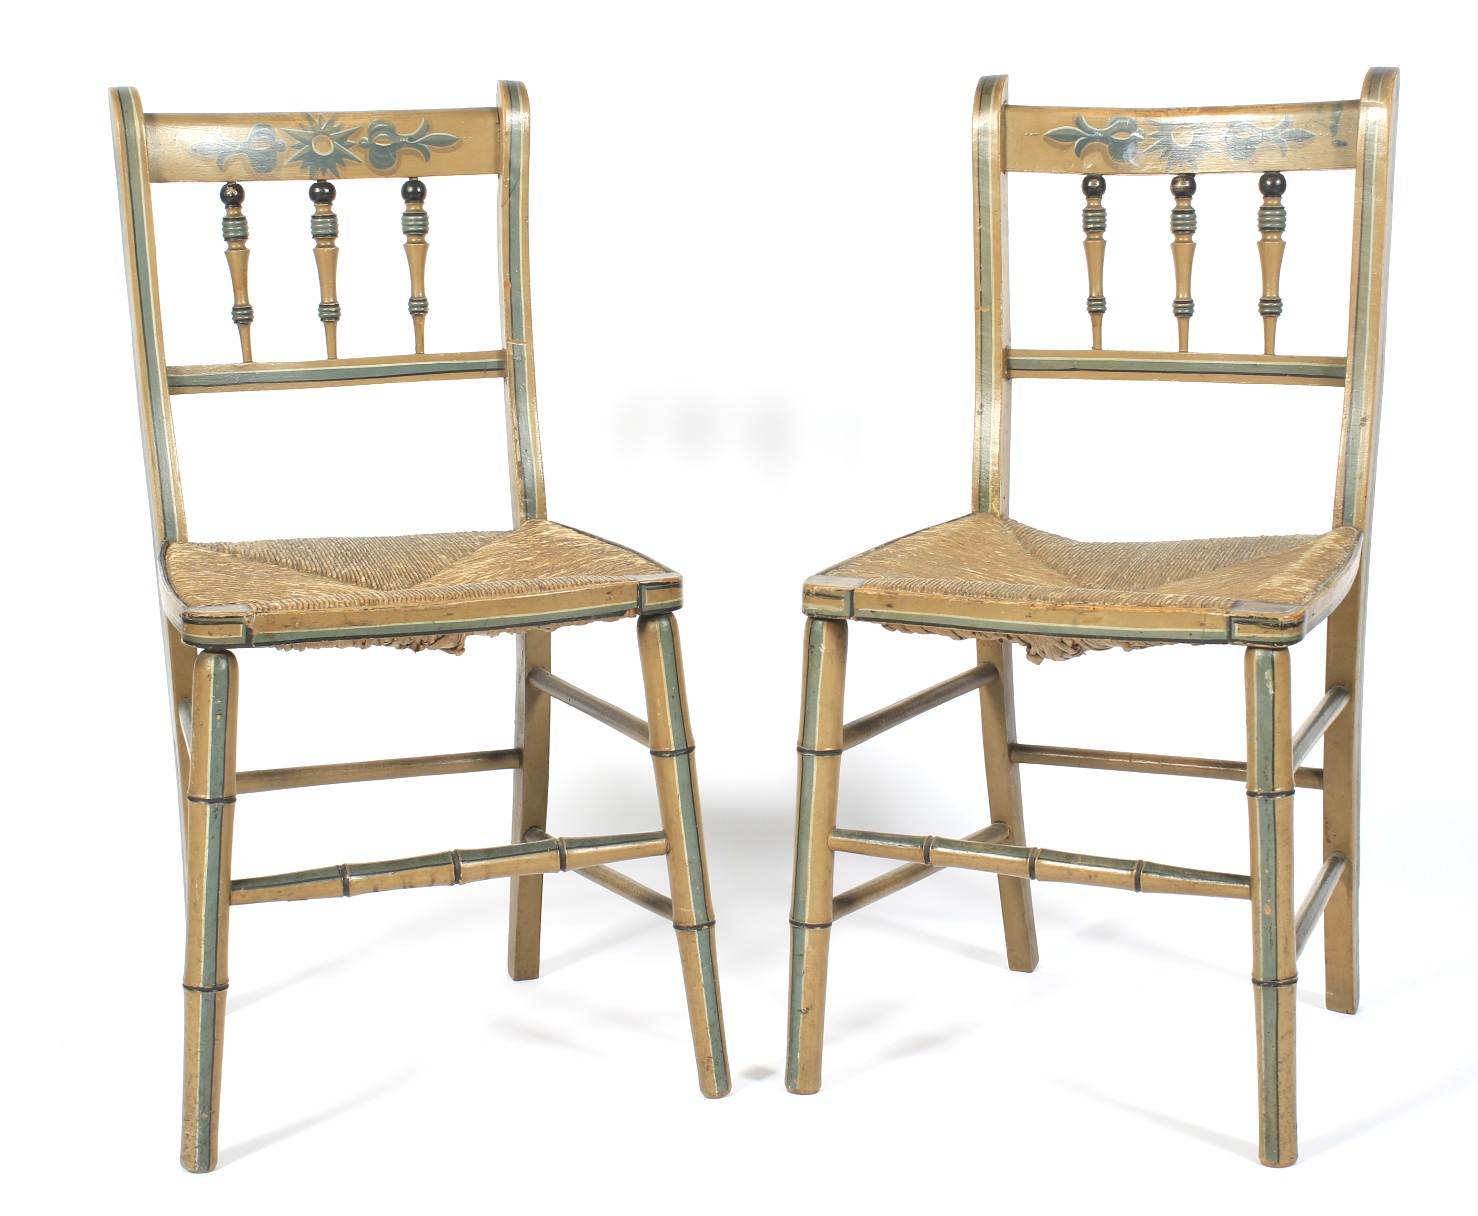 Pair of 19th century beech framed rush seat dining chairs.